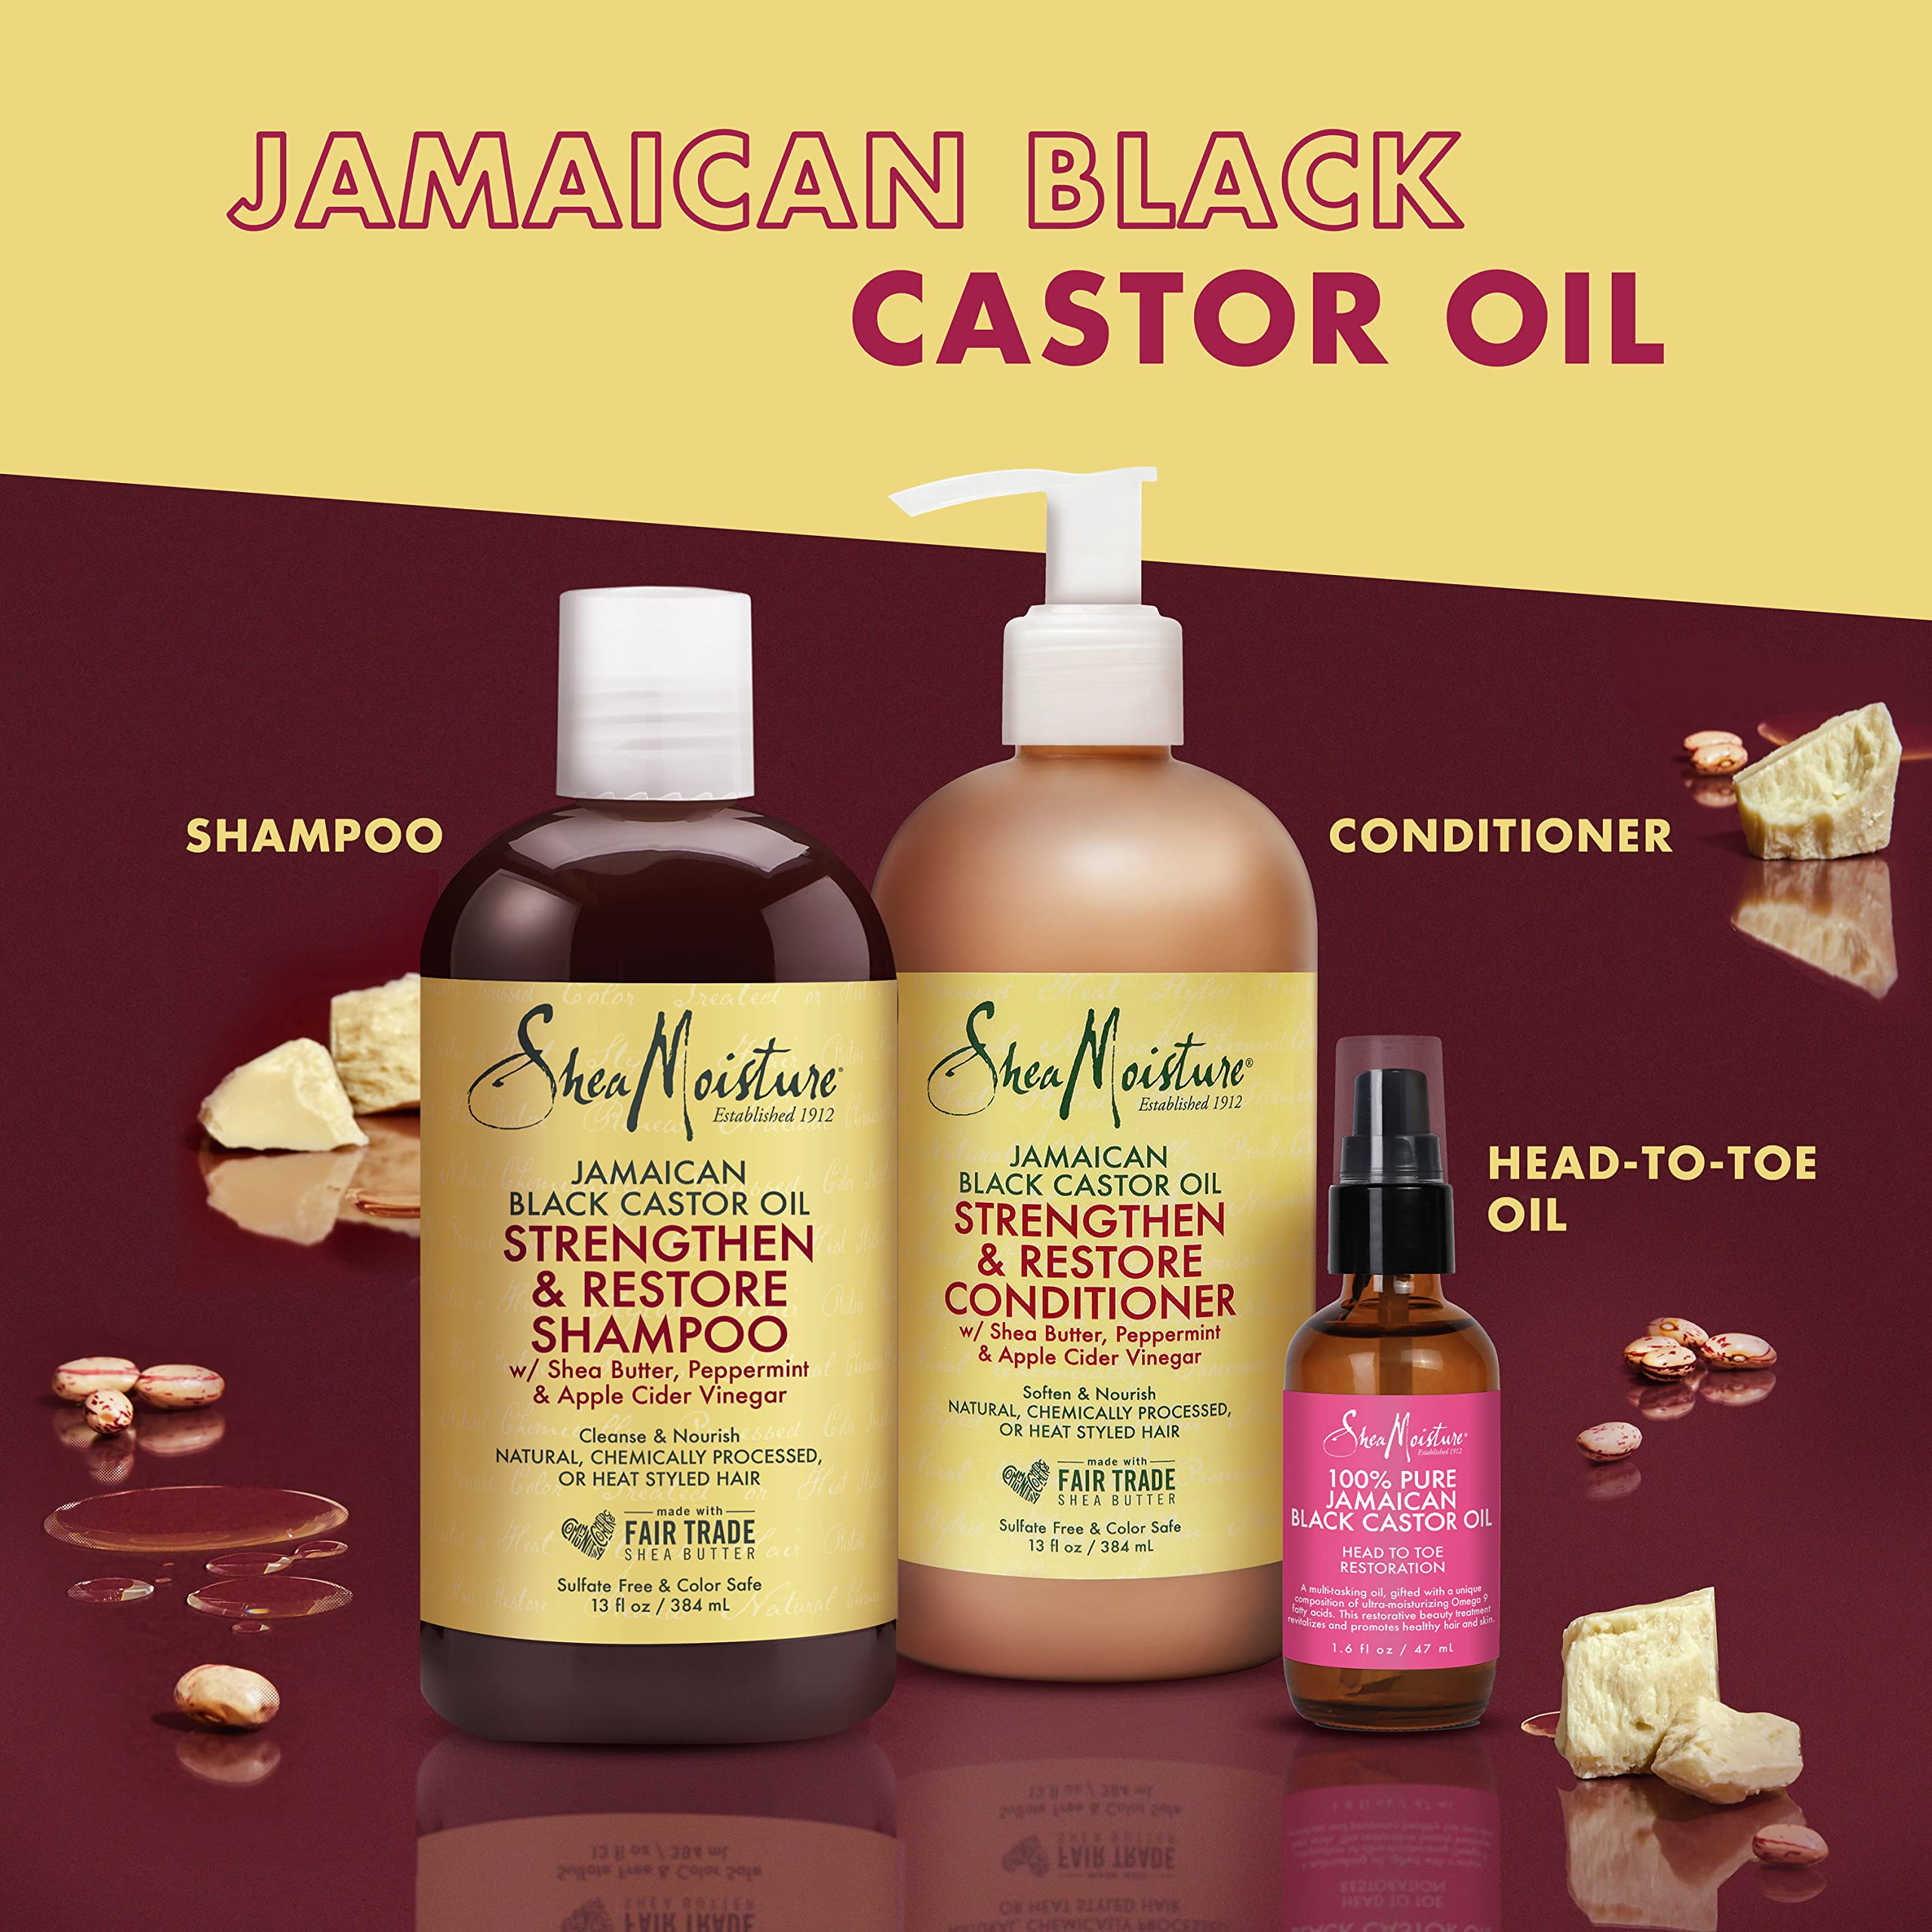 SheaMoisture Strengthen and Restore Shampoo, Conditioner and Head-To-Toe Restoration Body Care Oil for Dry Skin and Hair Jamaican Black Castor Oil Skin and Hair Care Regimen with Shea Butter